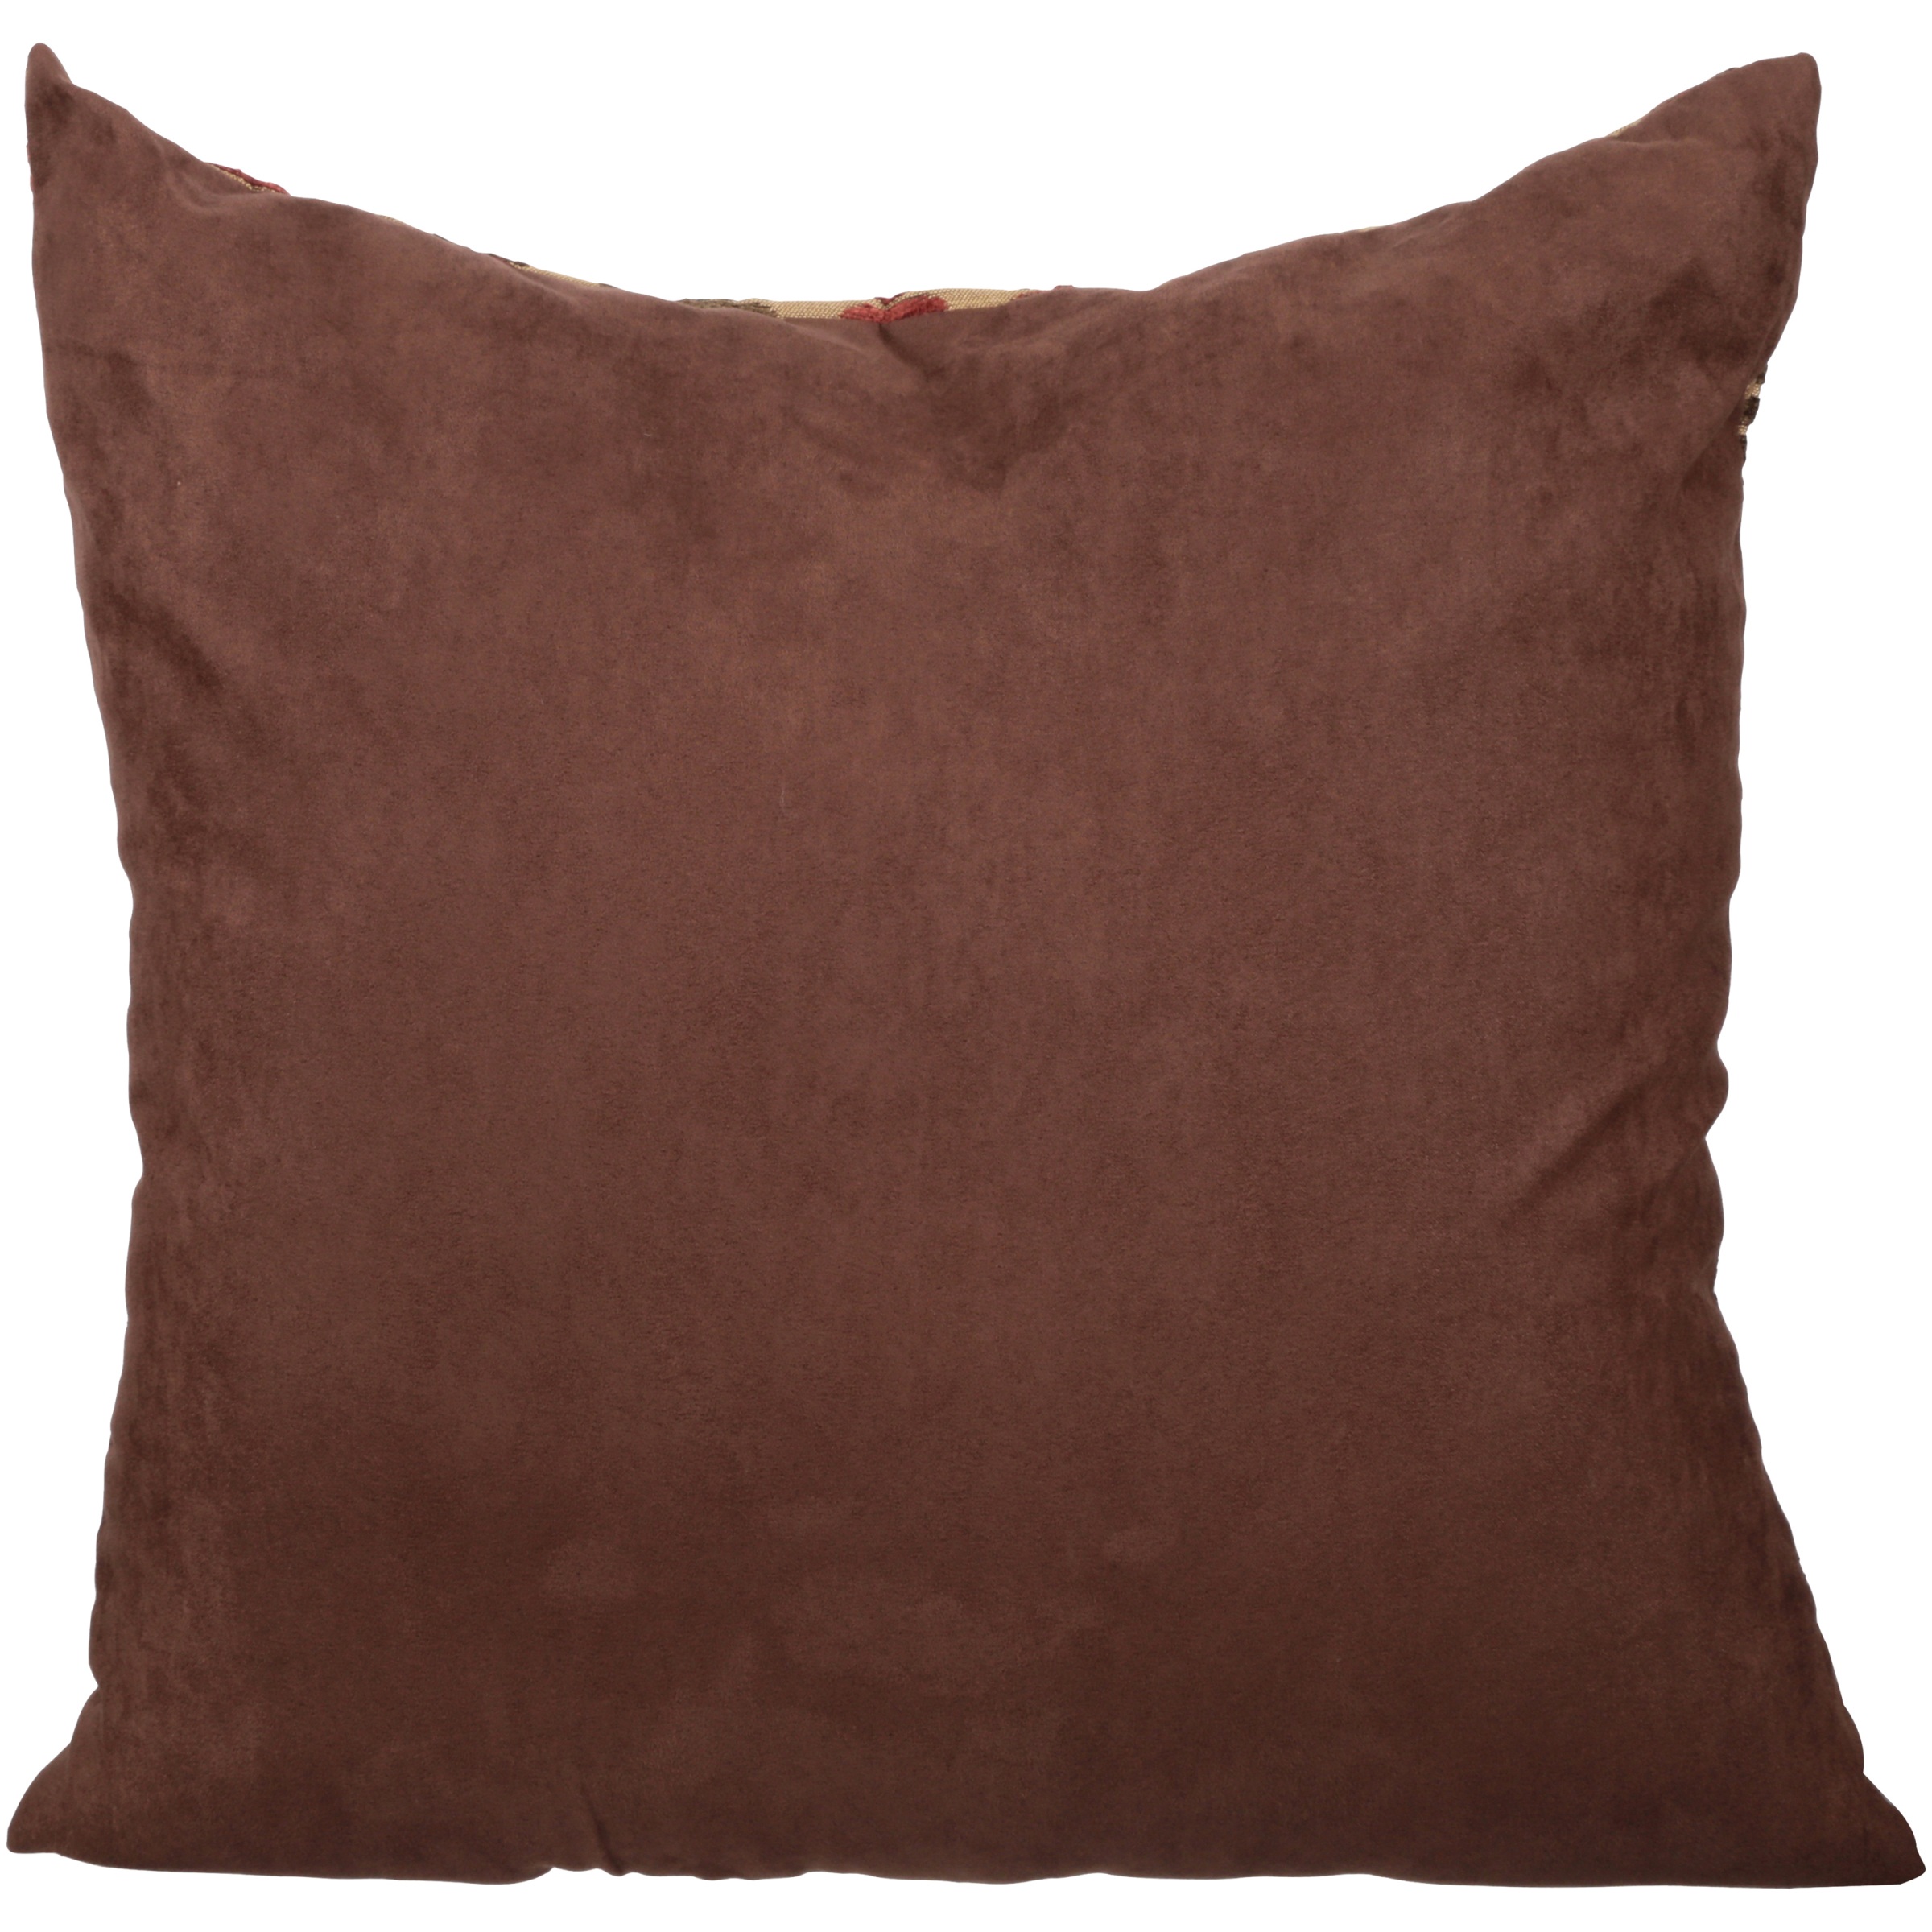 Better Homes and Gardens? Rust Diamond Pillow - image 2 of 4